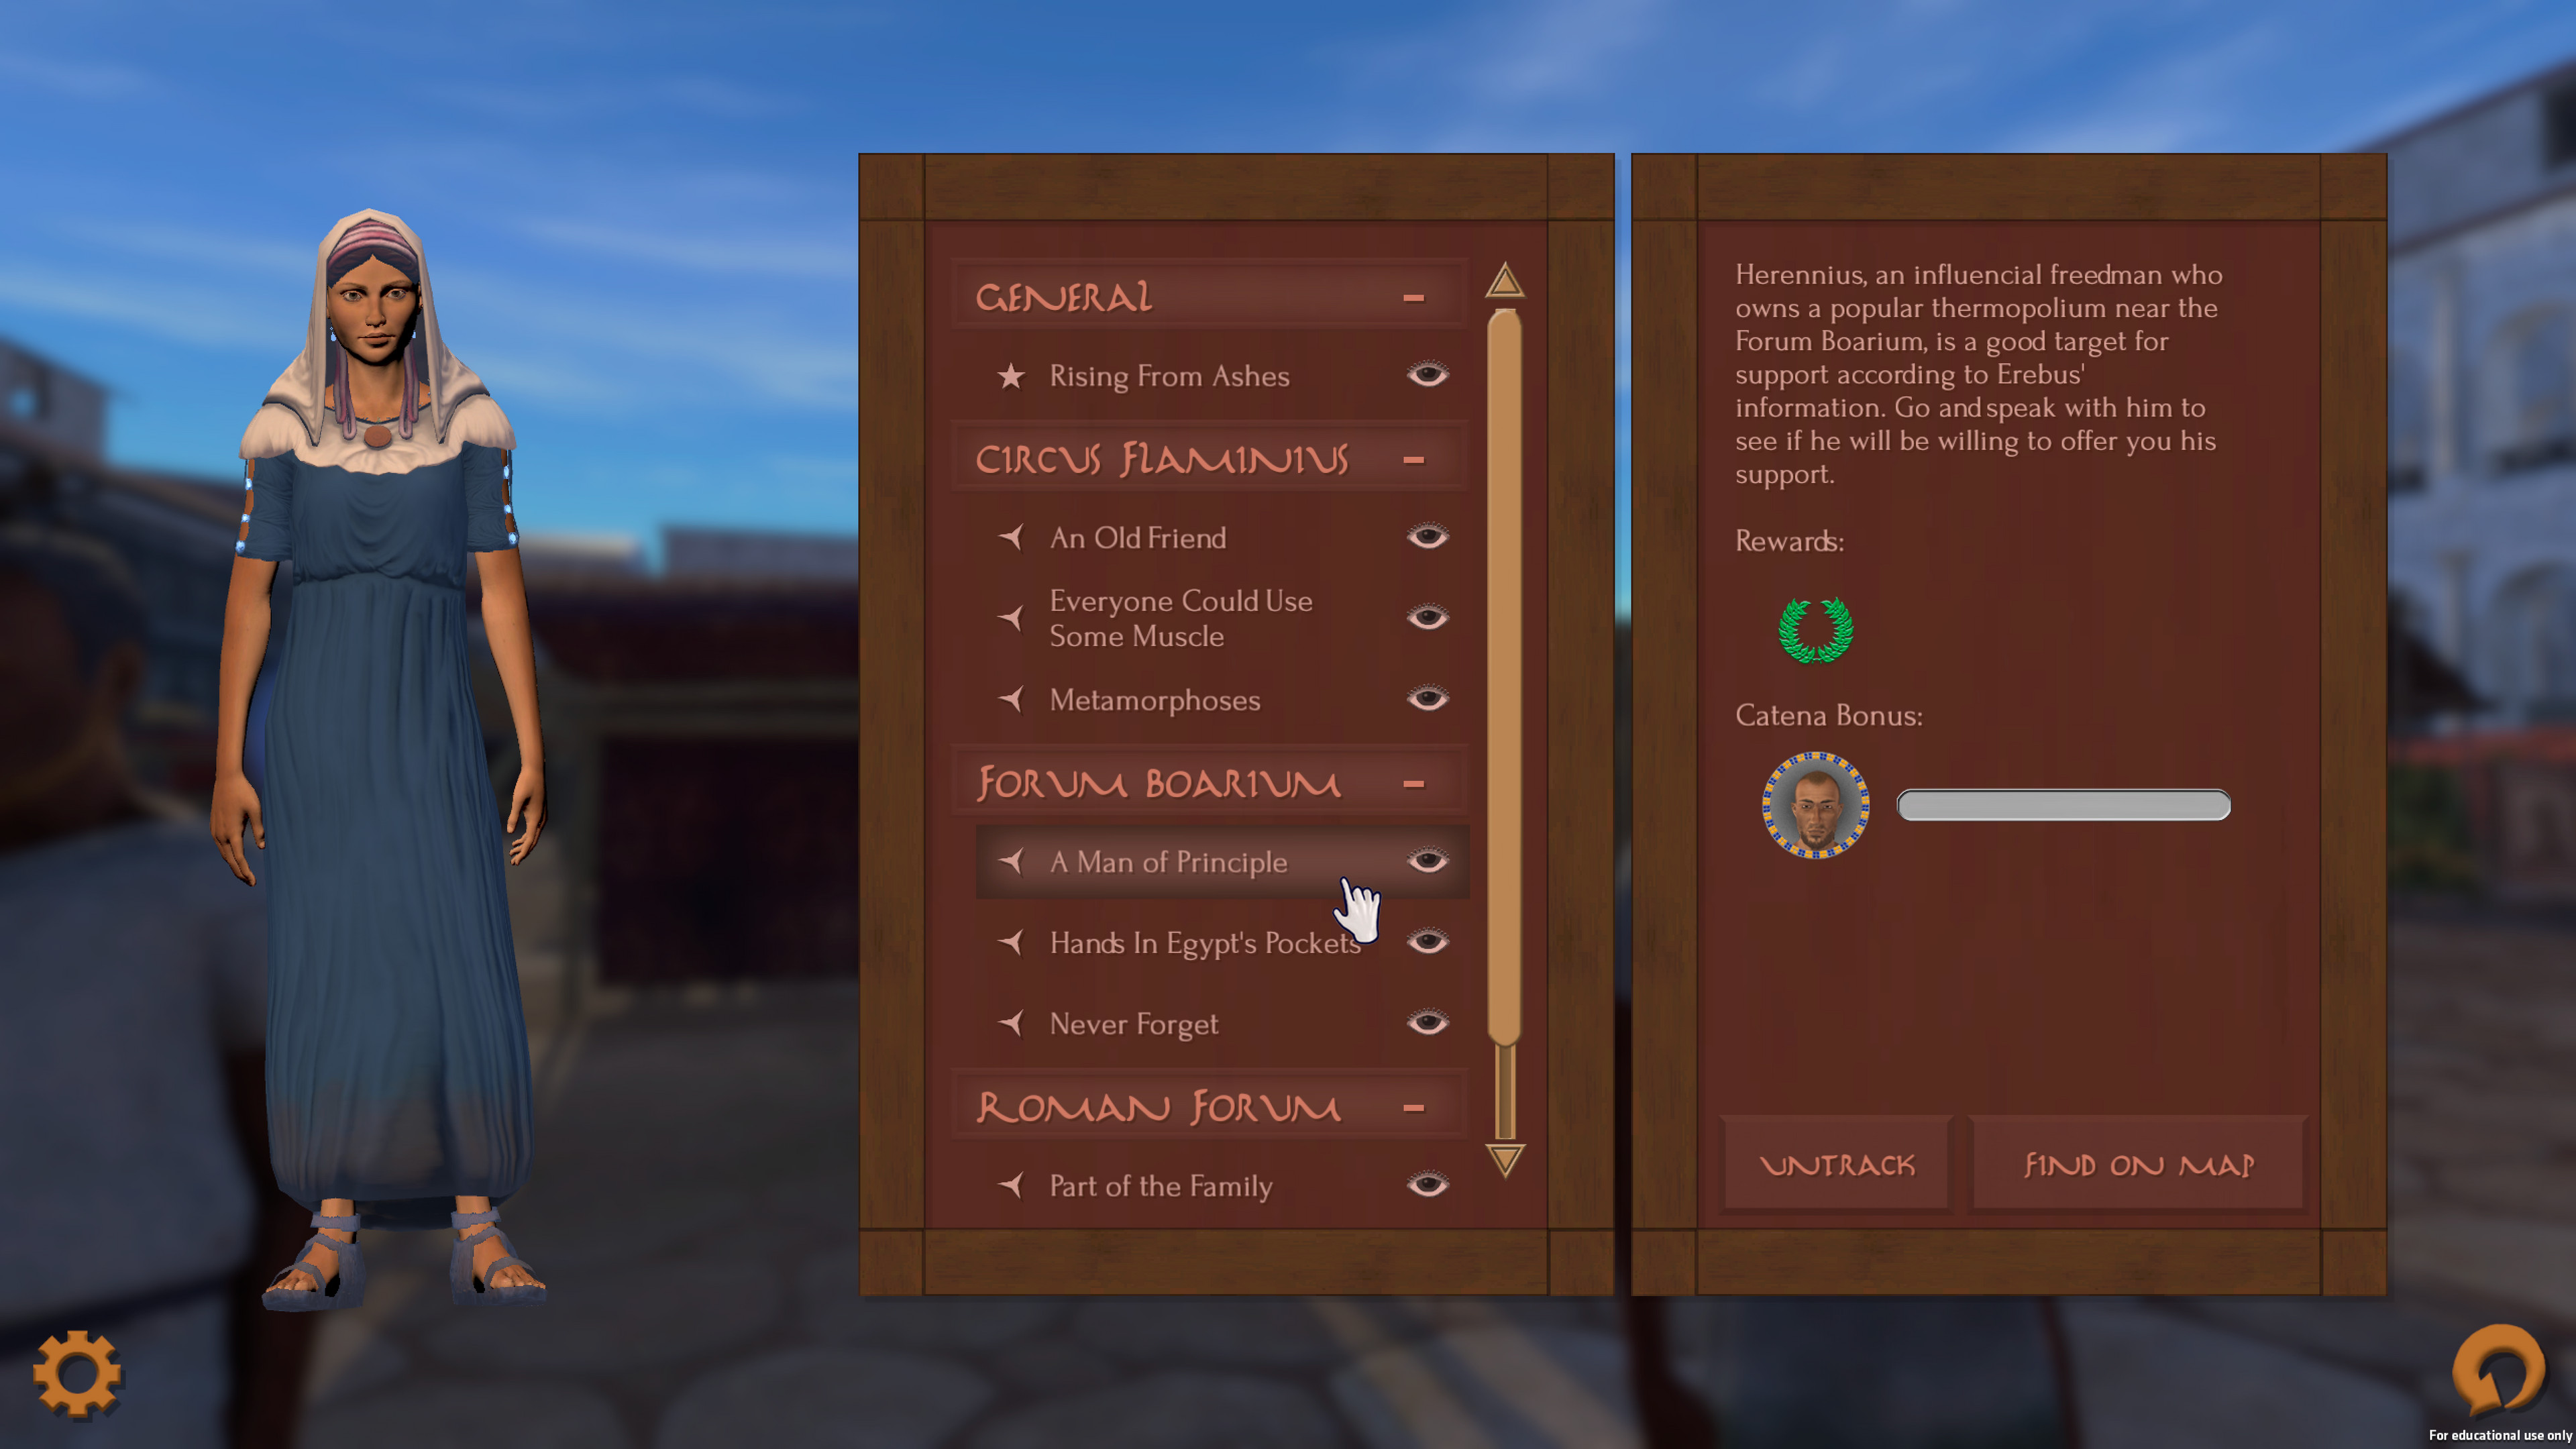 In the player's codex information about places, people, and events, they have encountered is collected, as well as current objectives. This is stylized as a wax tablet, common in the Roman empire as a portable and reusable writing surface.